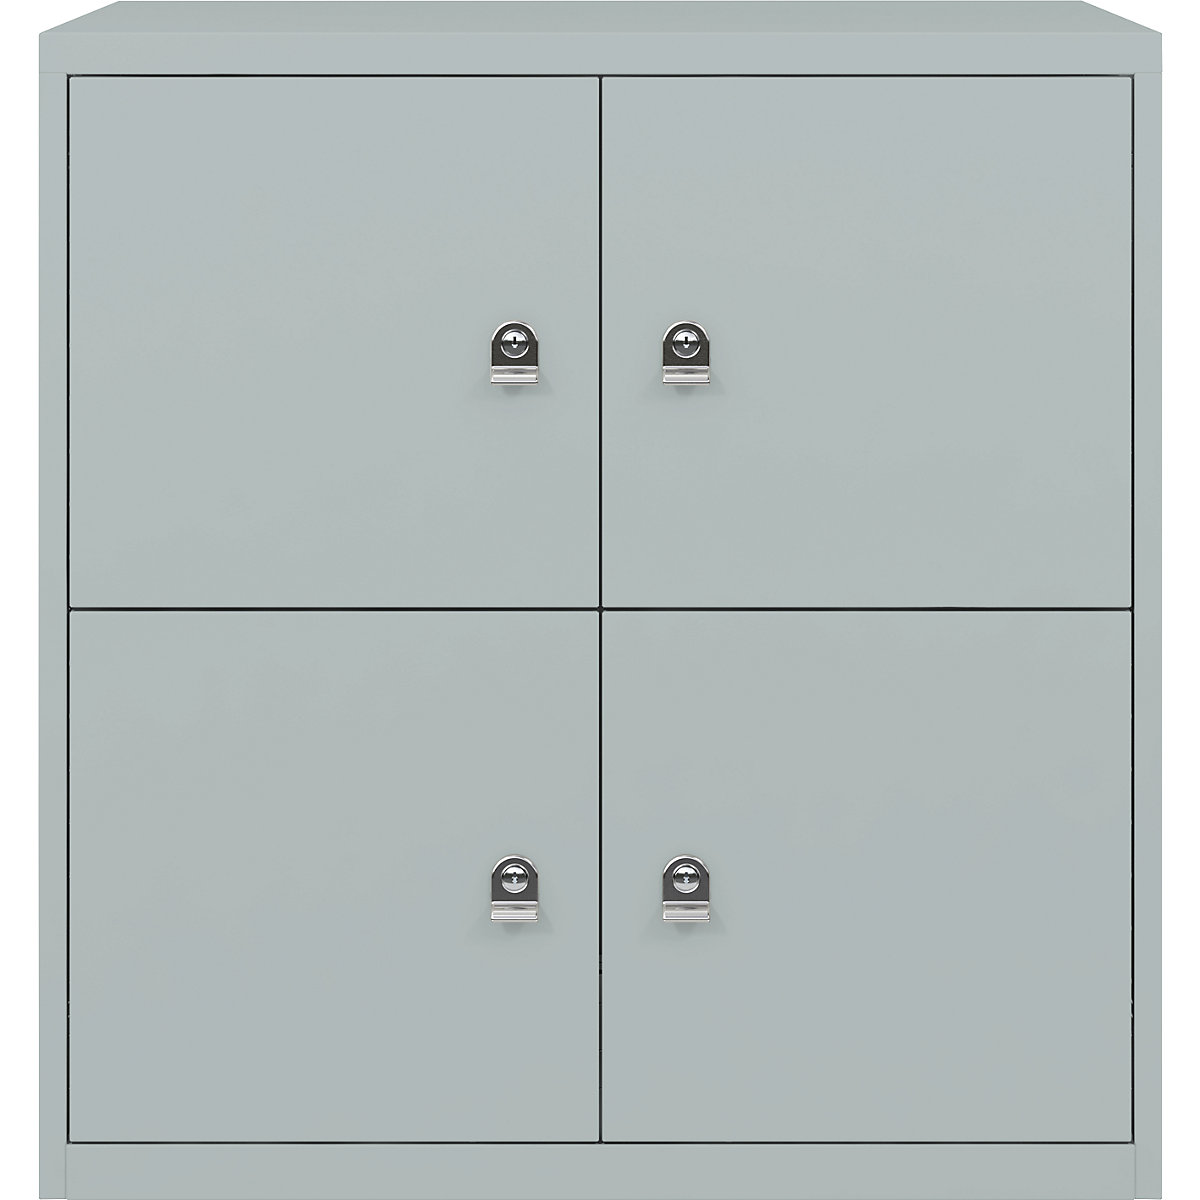 BISLEY – LateralFile™ lodge, with 4 lockable compartments, height 375 mm each, silver